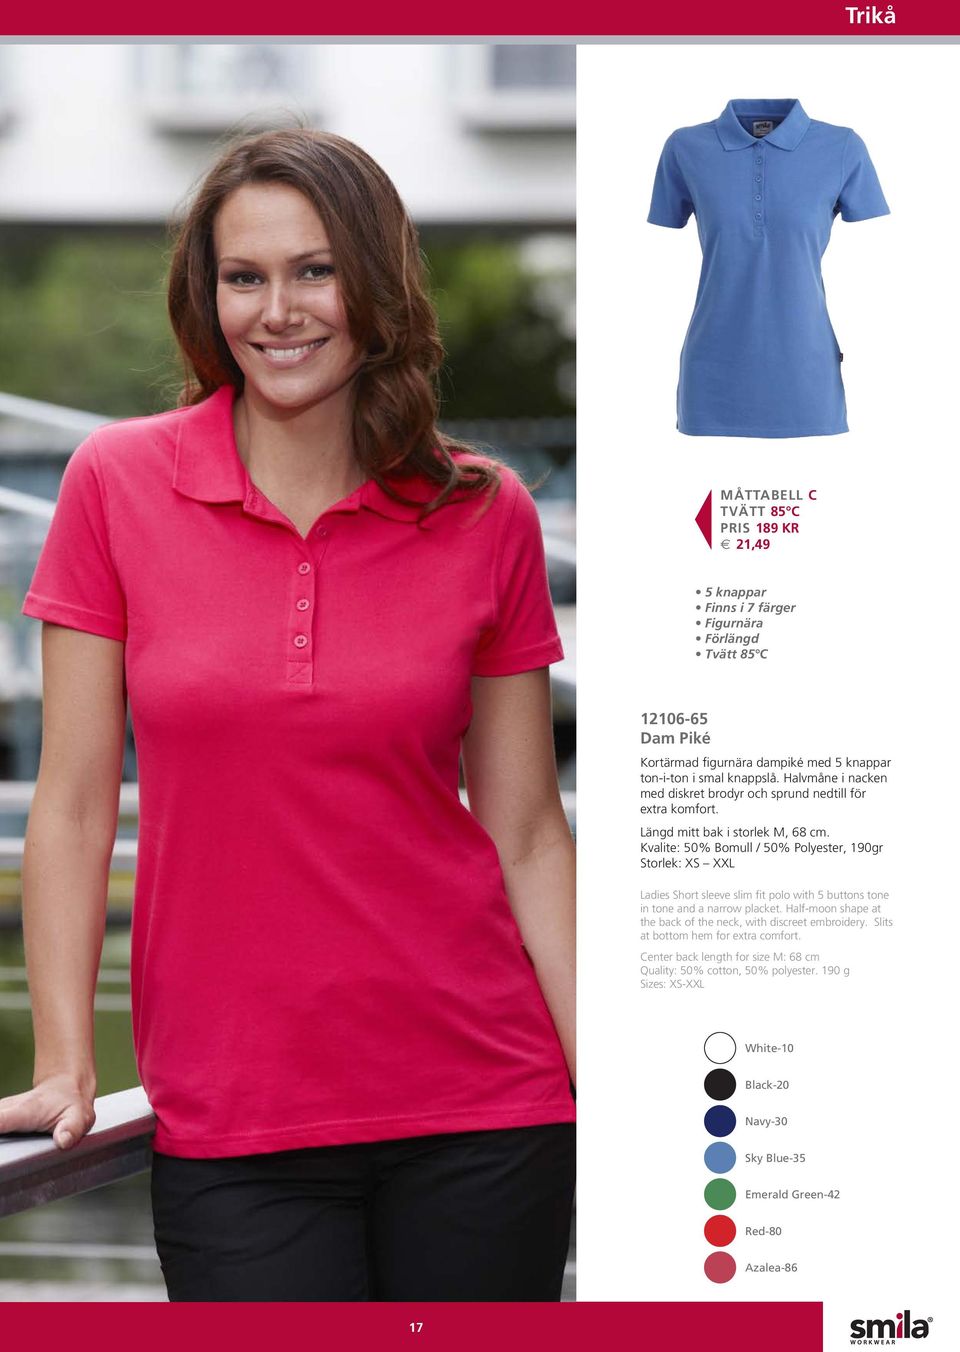 Kvalite: 50% Bomull / 50% Polyester, 190gr Storlek: XS XXL Ladies Short sleeve slim fit polo with 5 buttons tone in tone and a narrow placket.